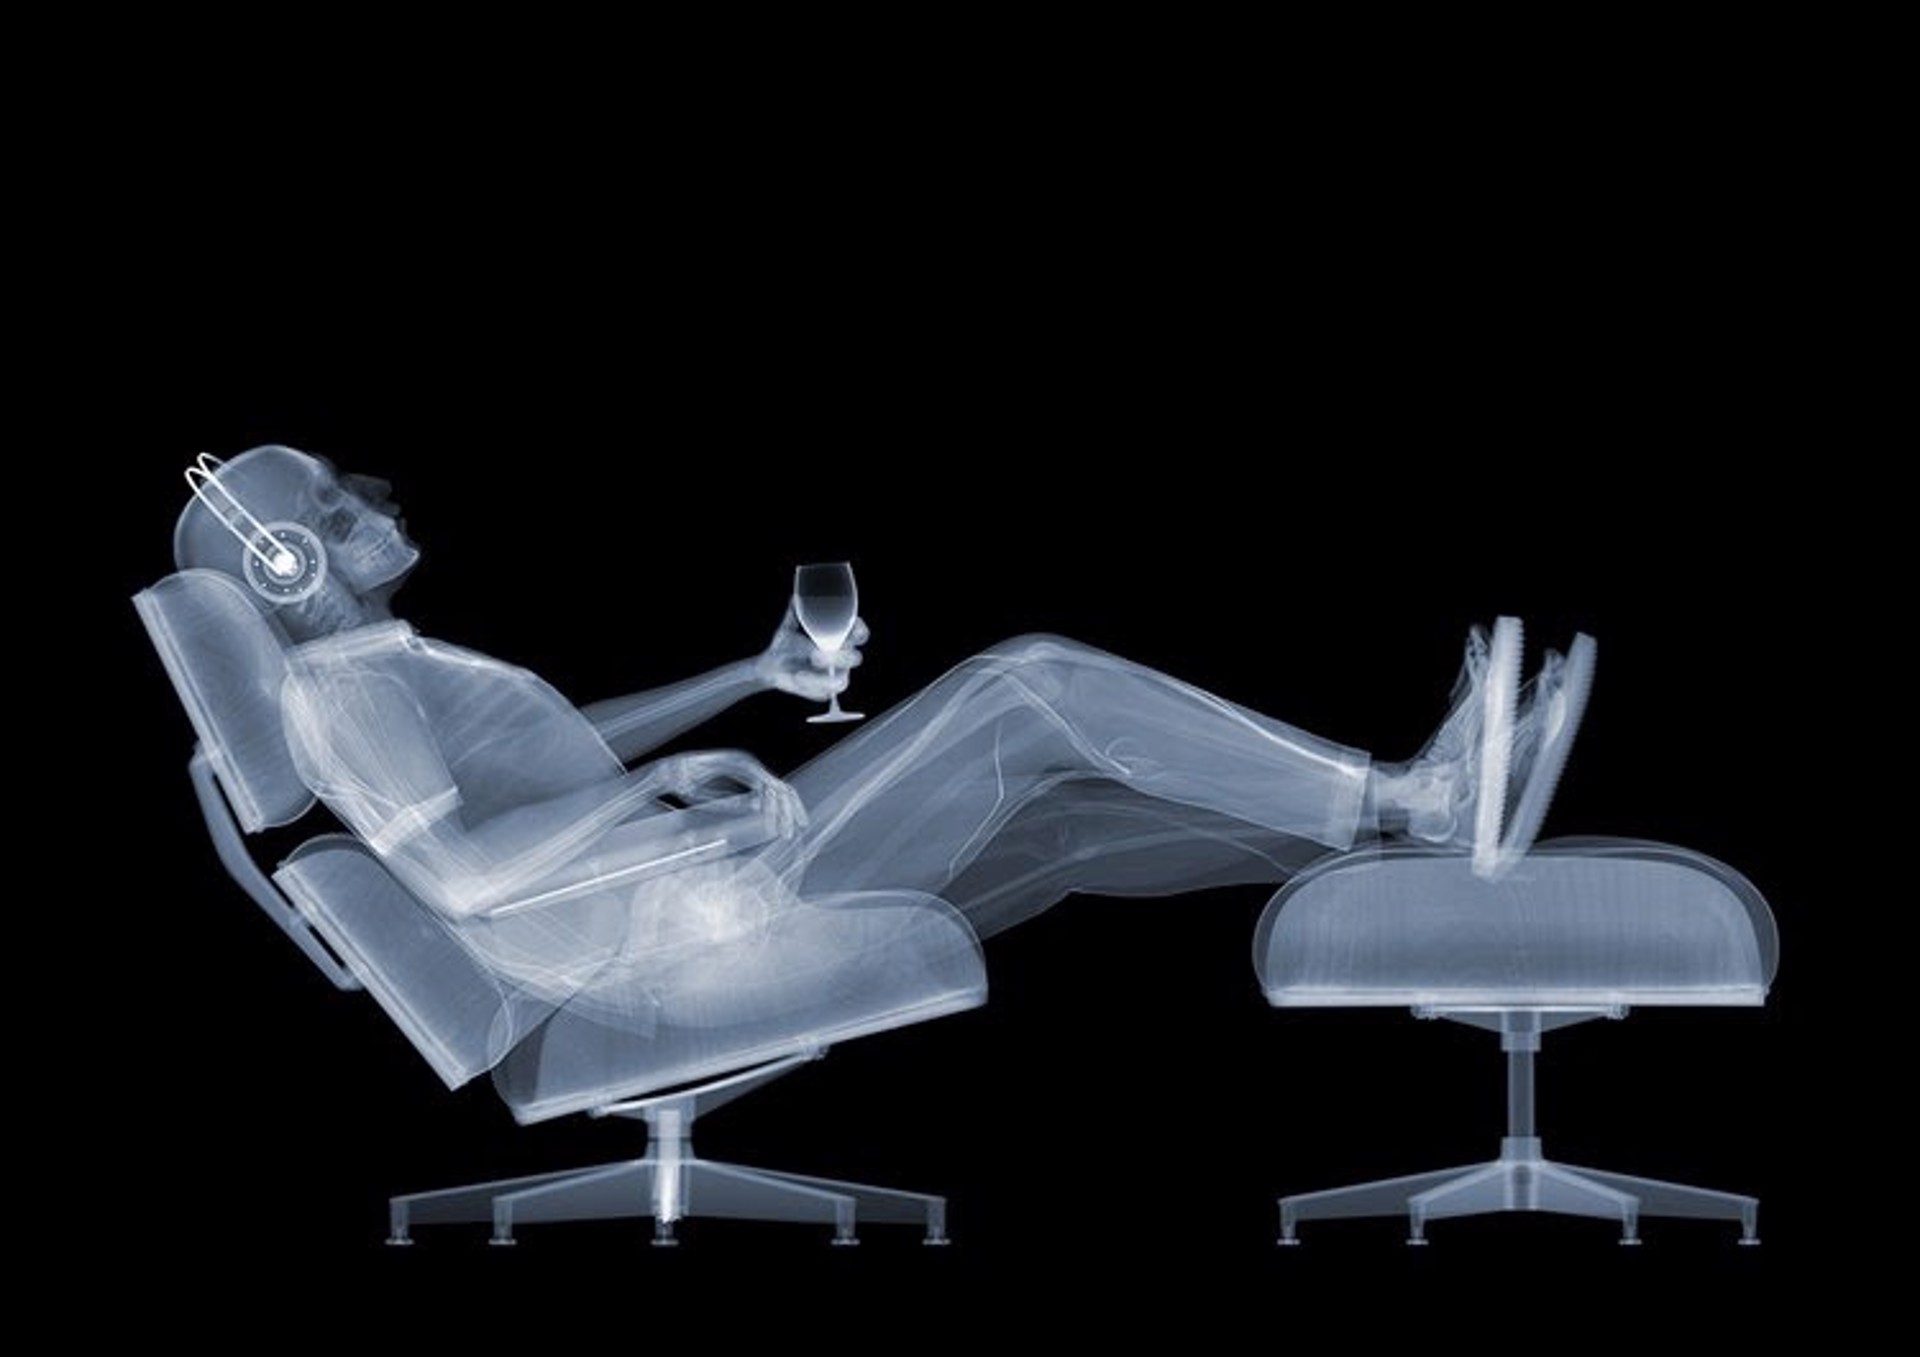 Eames Chillin' by Nick Veasey